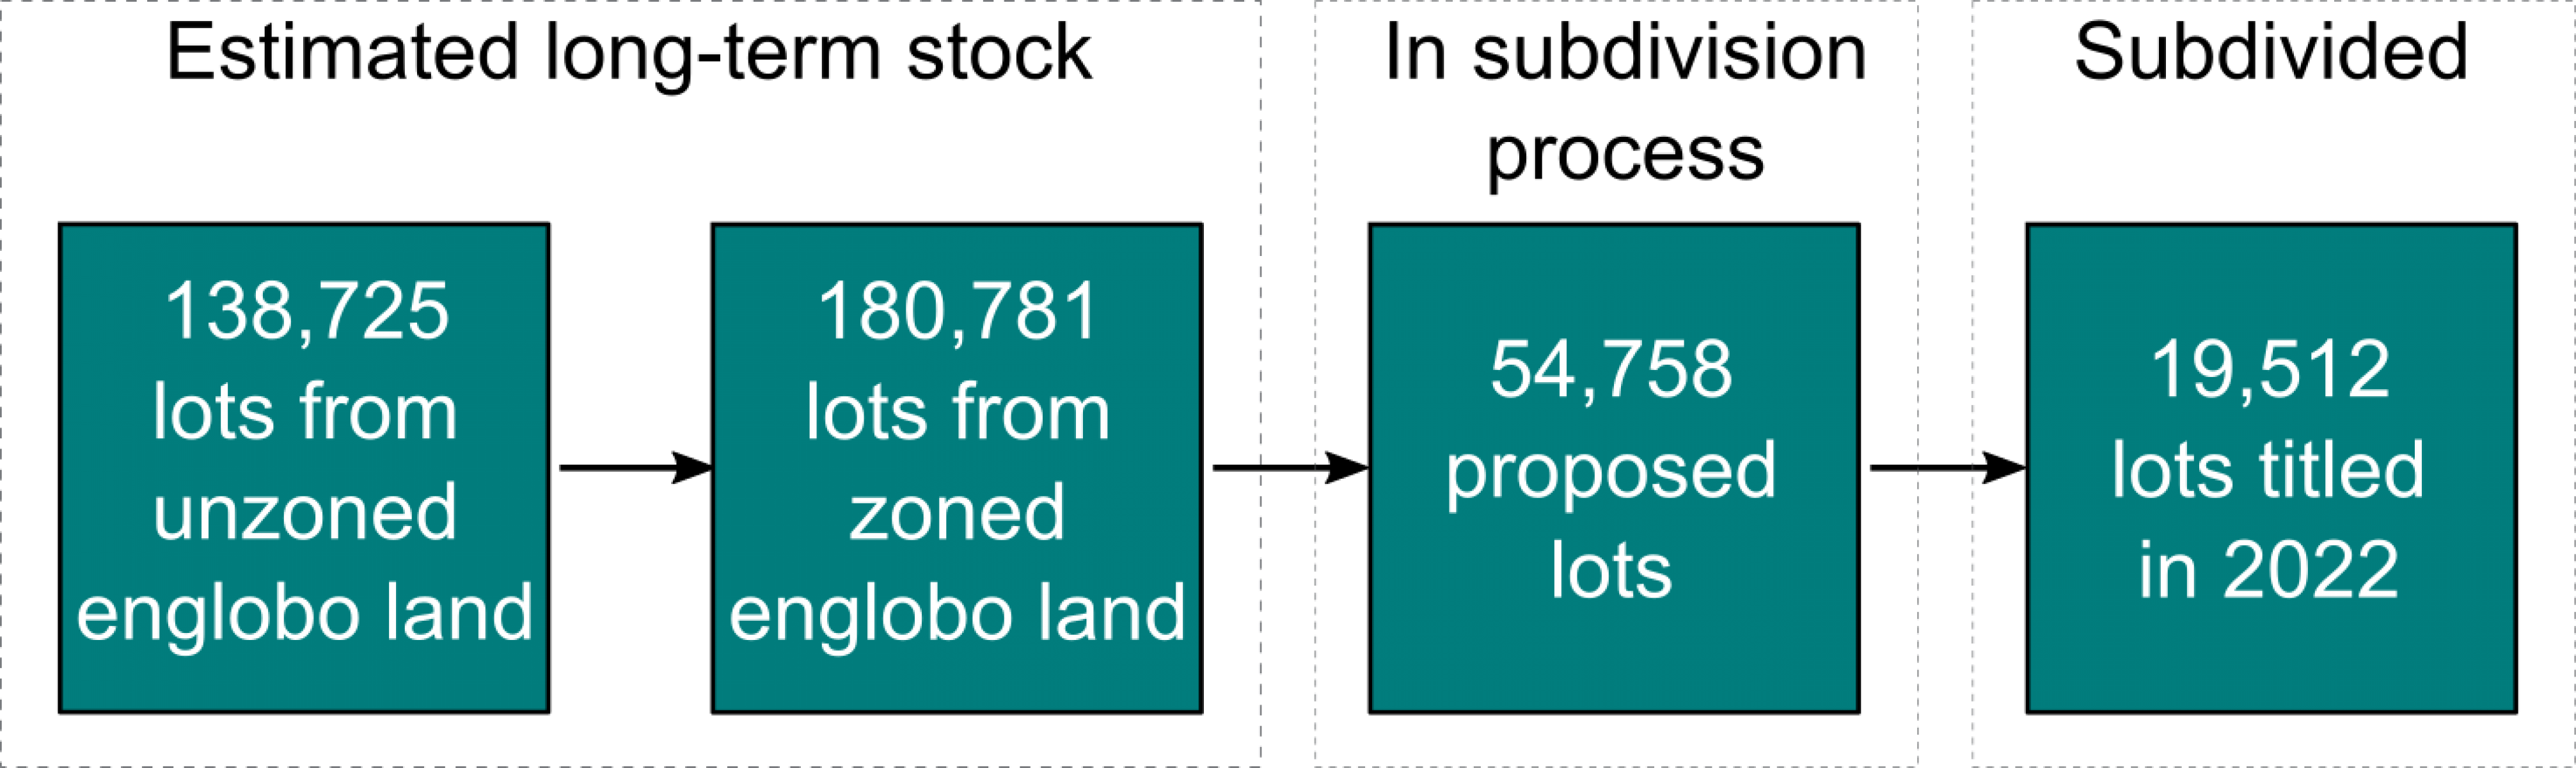 The image is an infographic that includes this information. Estimated long-term stock 138,725 lots from unzoned englobo land, 180,781 lots from zoned englobo land. In subdivision process 54,758 proposed lots, subdivided 19,512 lots titled in 2022. 